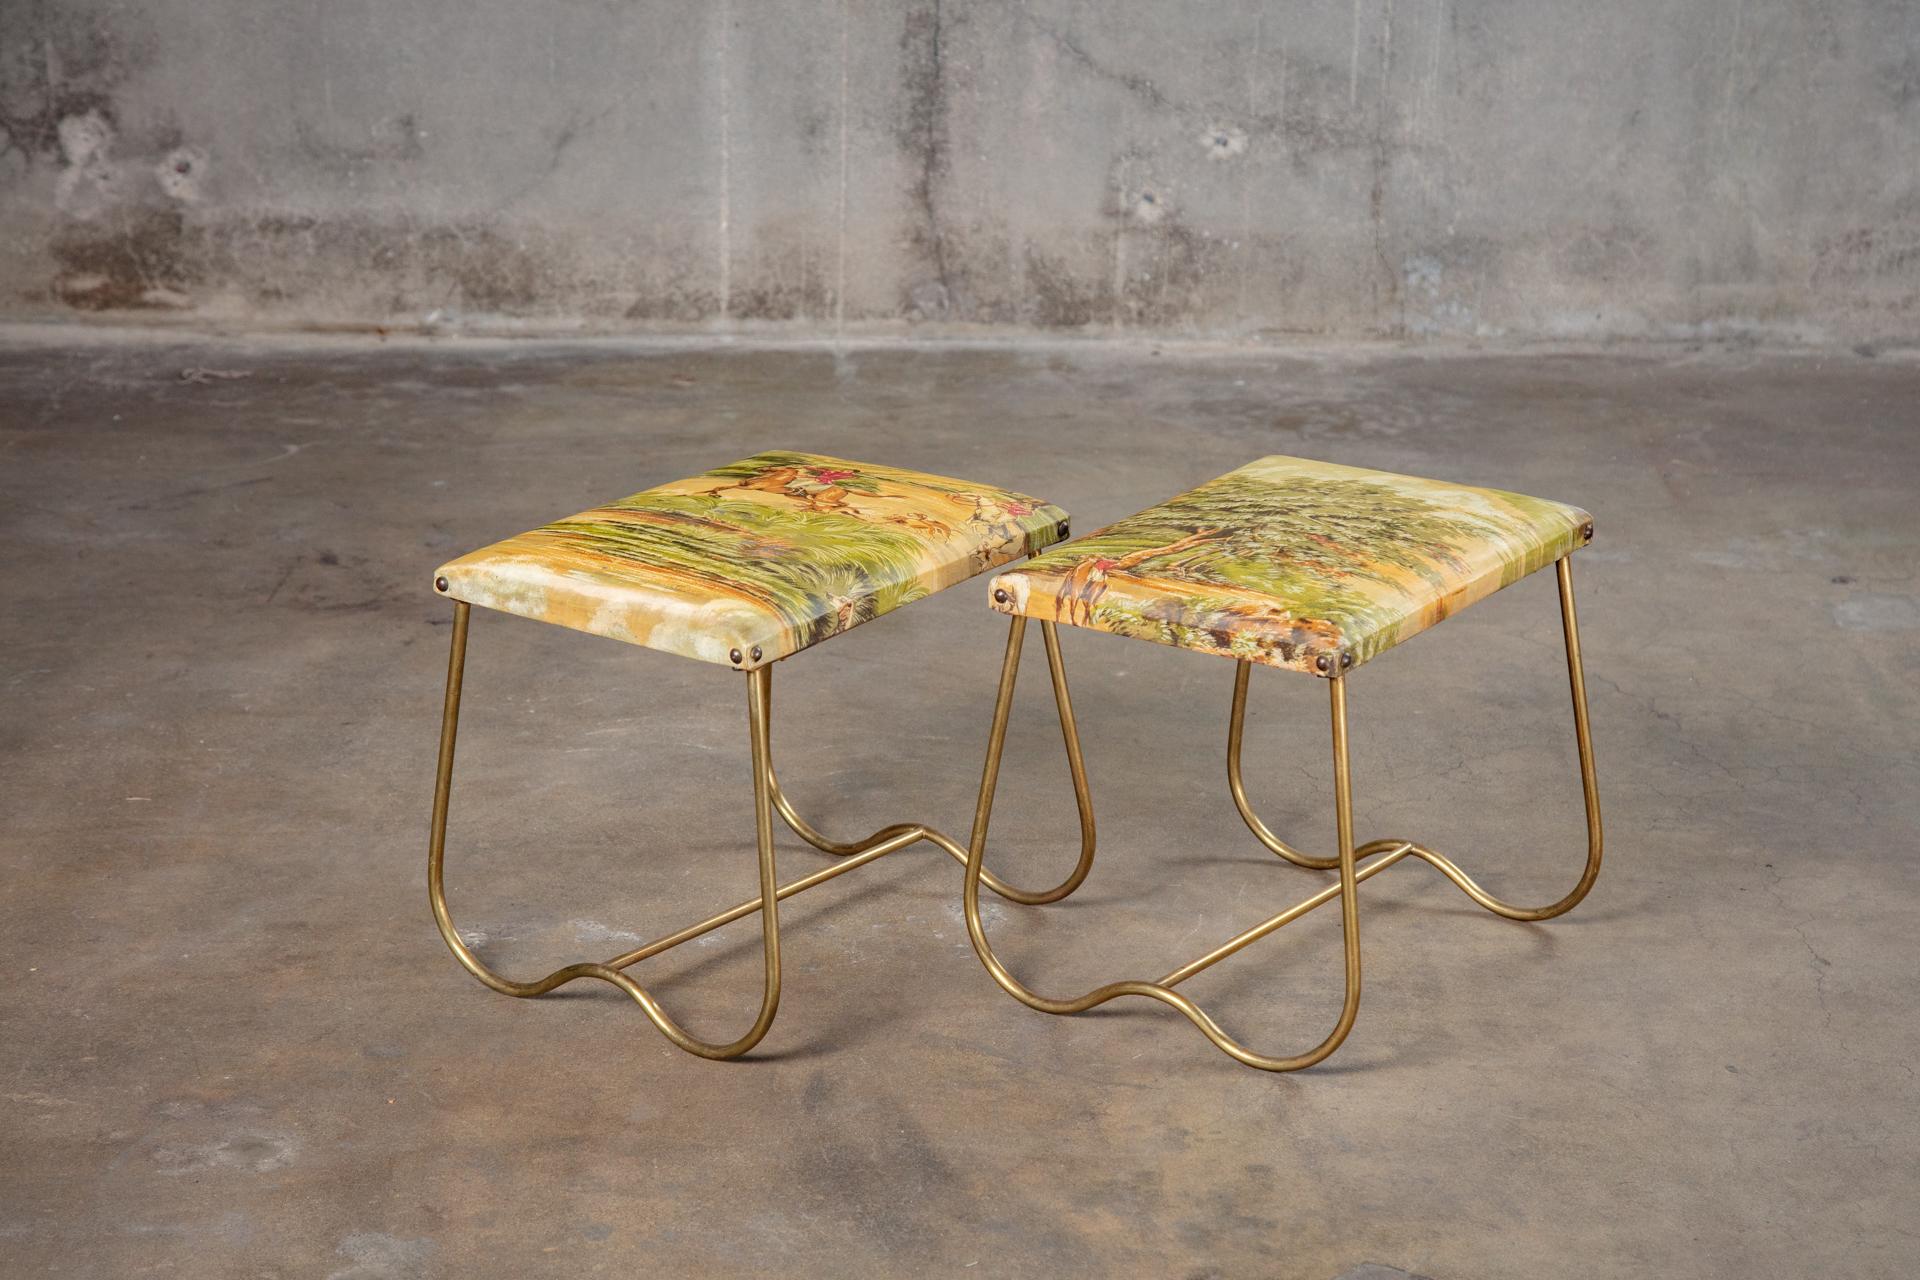 A pair of Italian midcentury brass benches or stools, with upholstered seats and shaped bases, circa 1950.